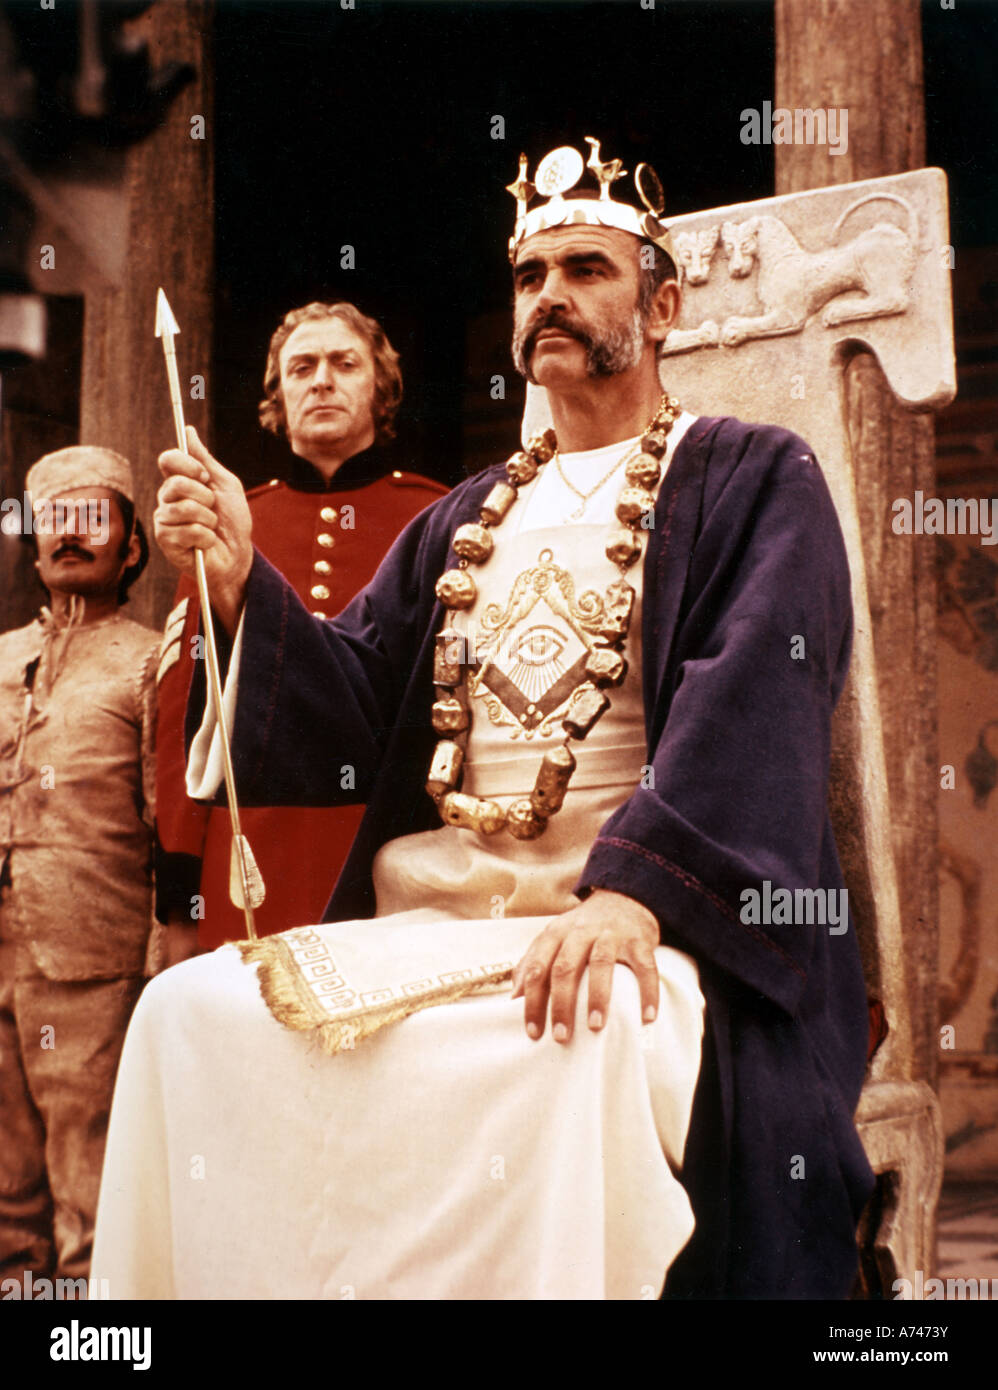 MAN WHO WOULD BE KING 1975 Columbia/Allied Artists film with Sean Connery seated and Michael Caine in uniform Stock Photo